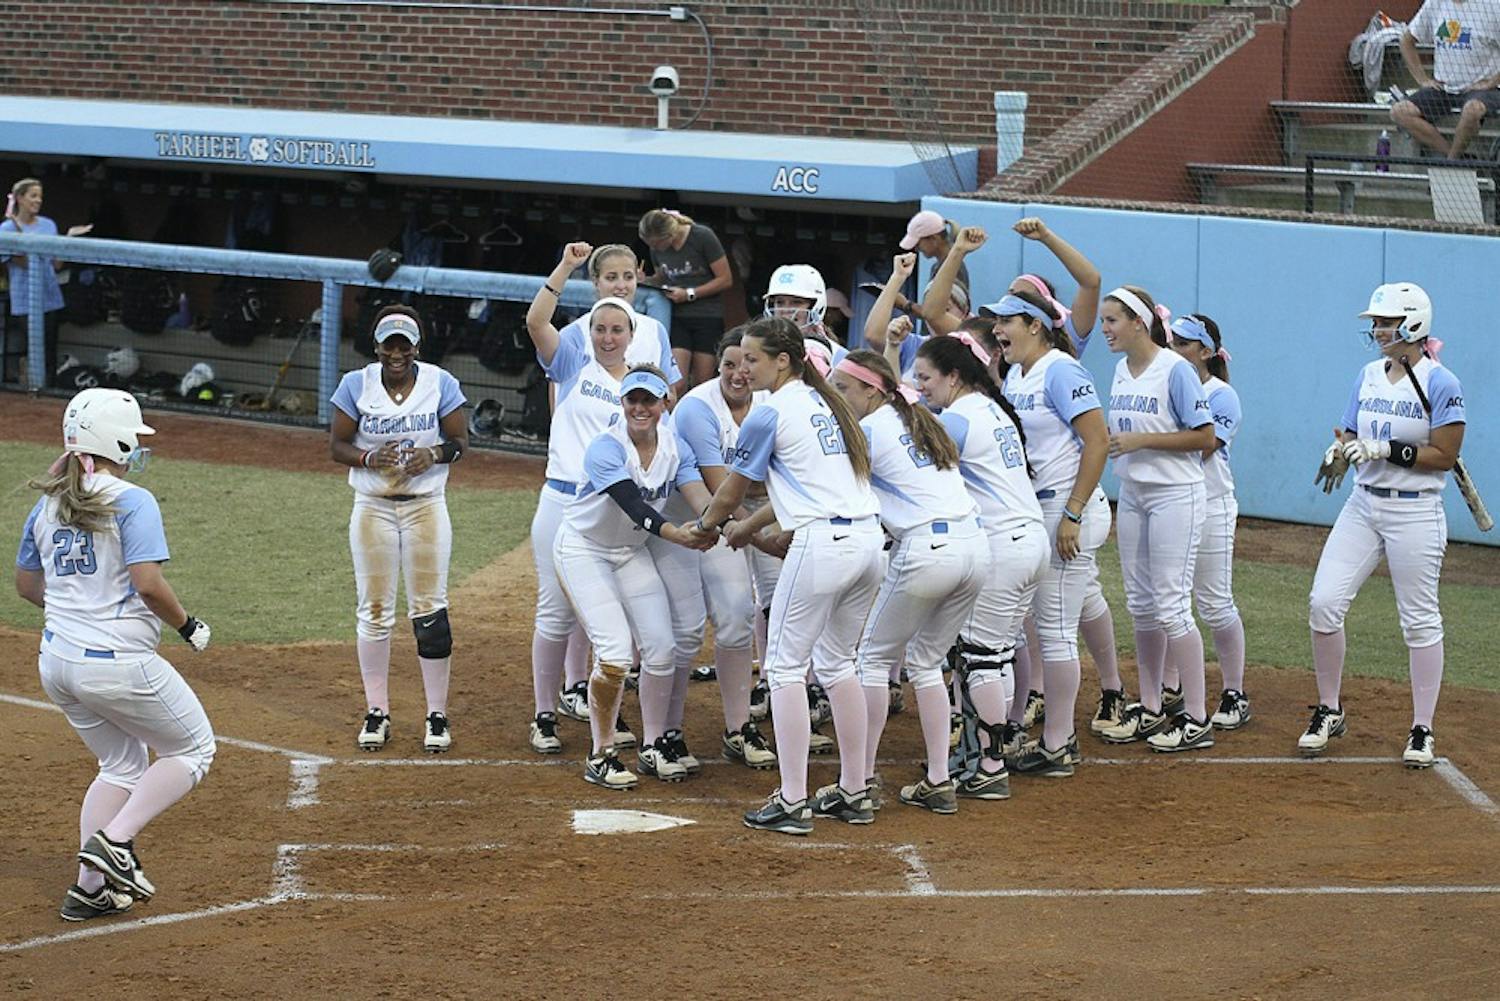 The team celebrates after Tracy Chandless, a junior from Canyon Country, California hits a home run during a preseason game against North Carolina Central University on October 8.
